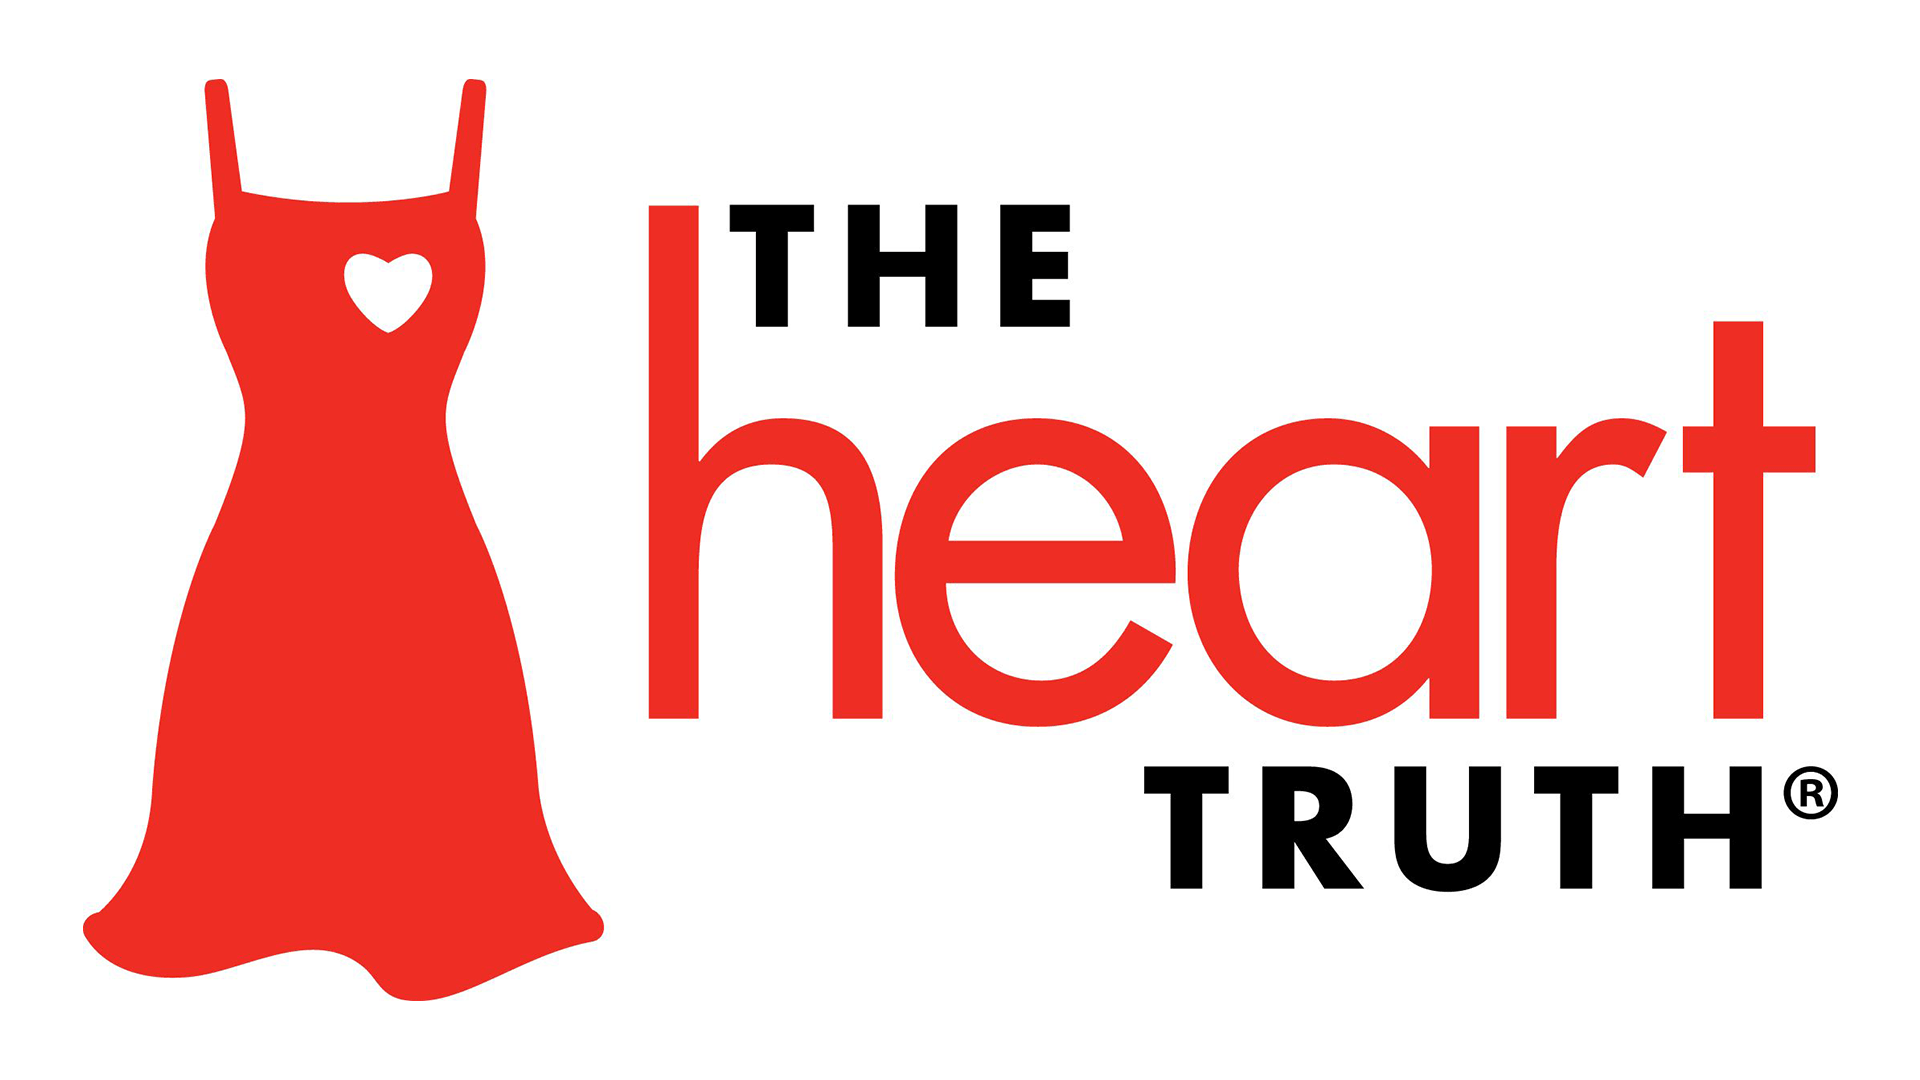 Red Dress Logo - The Heart Truth | National Heart, Lung, and Blood Institute (NHLBI)